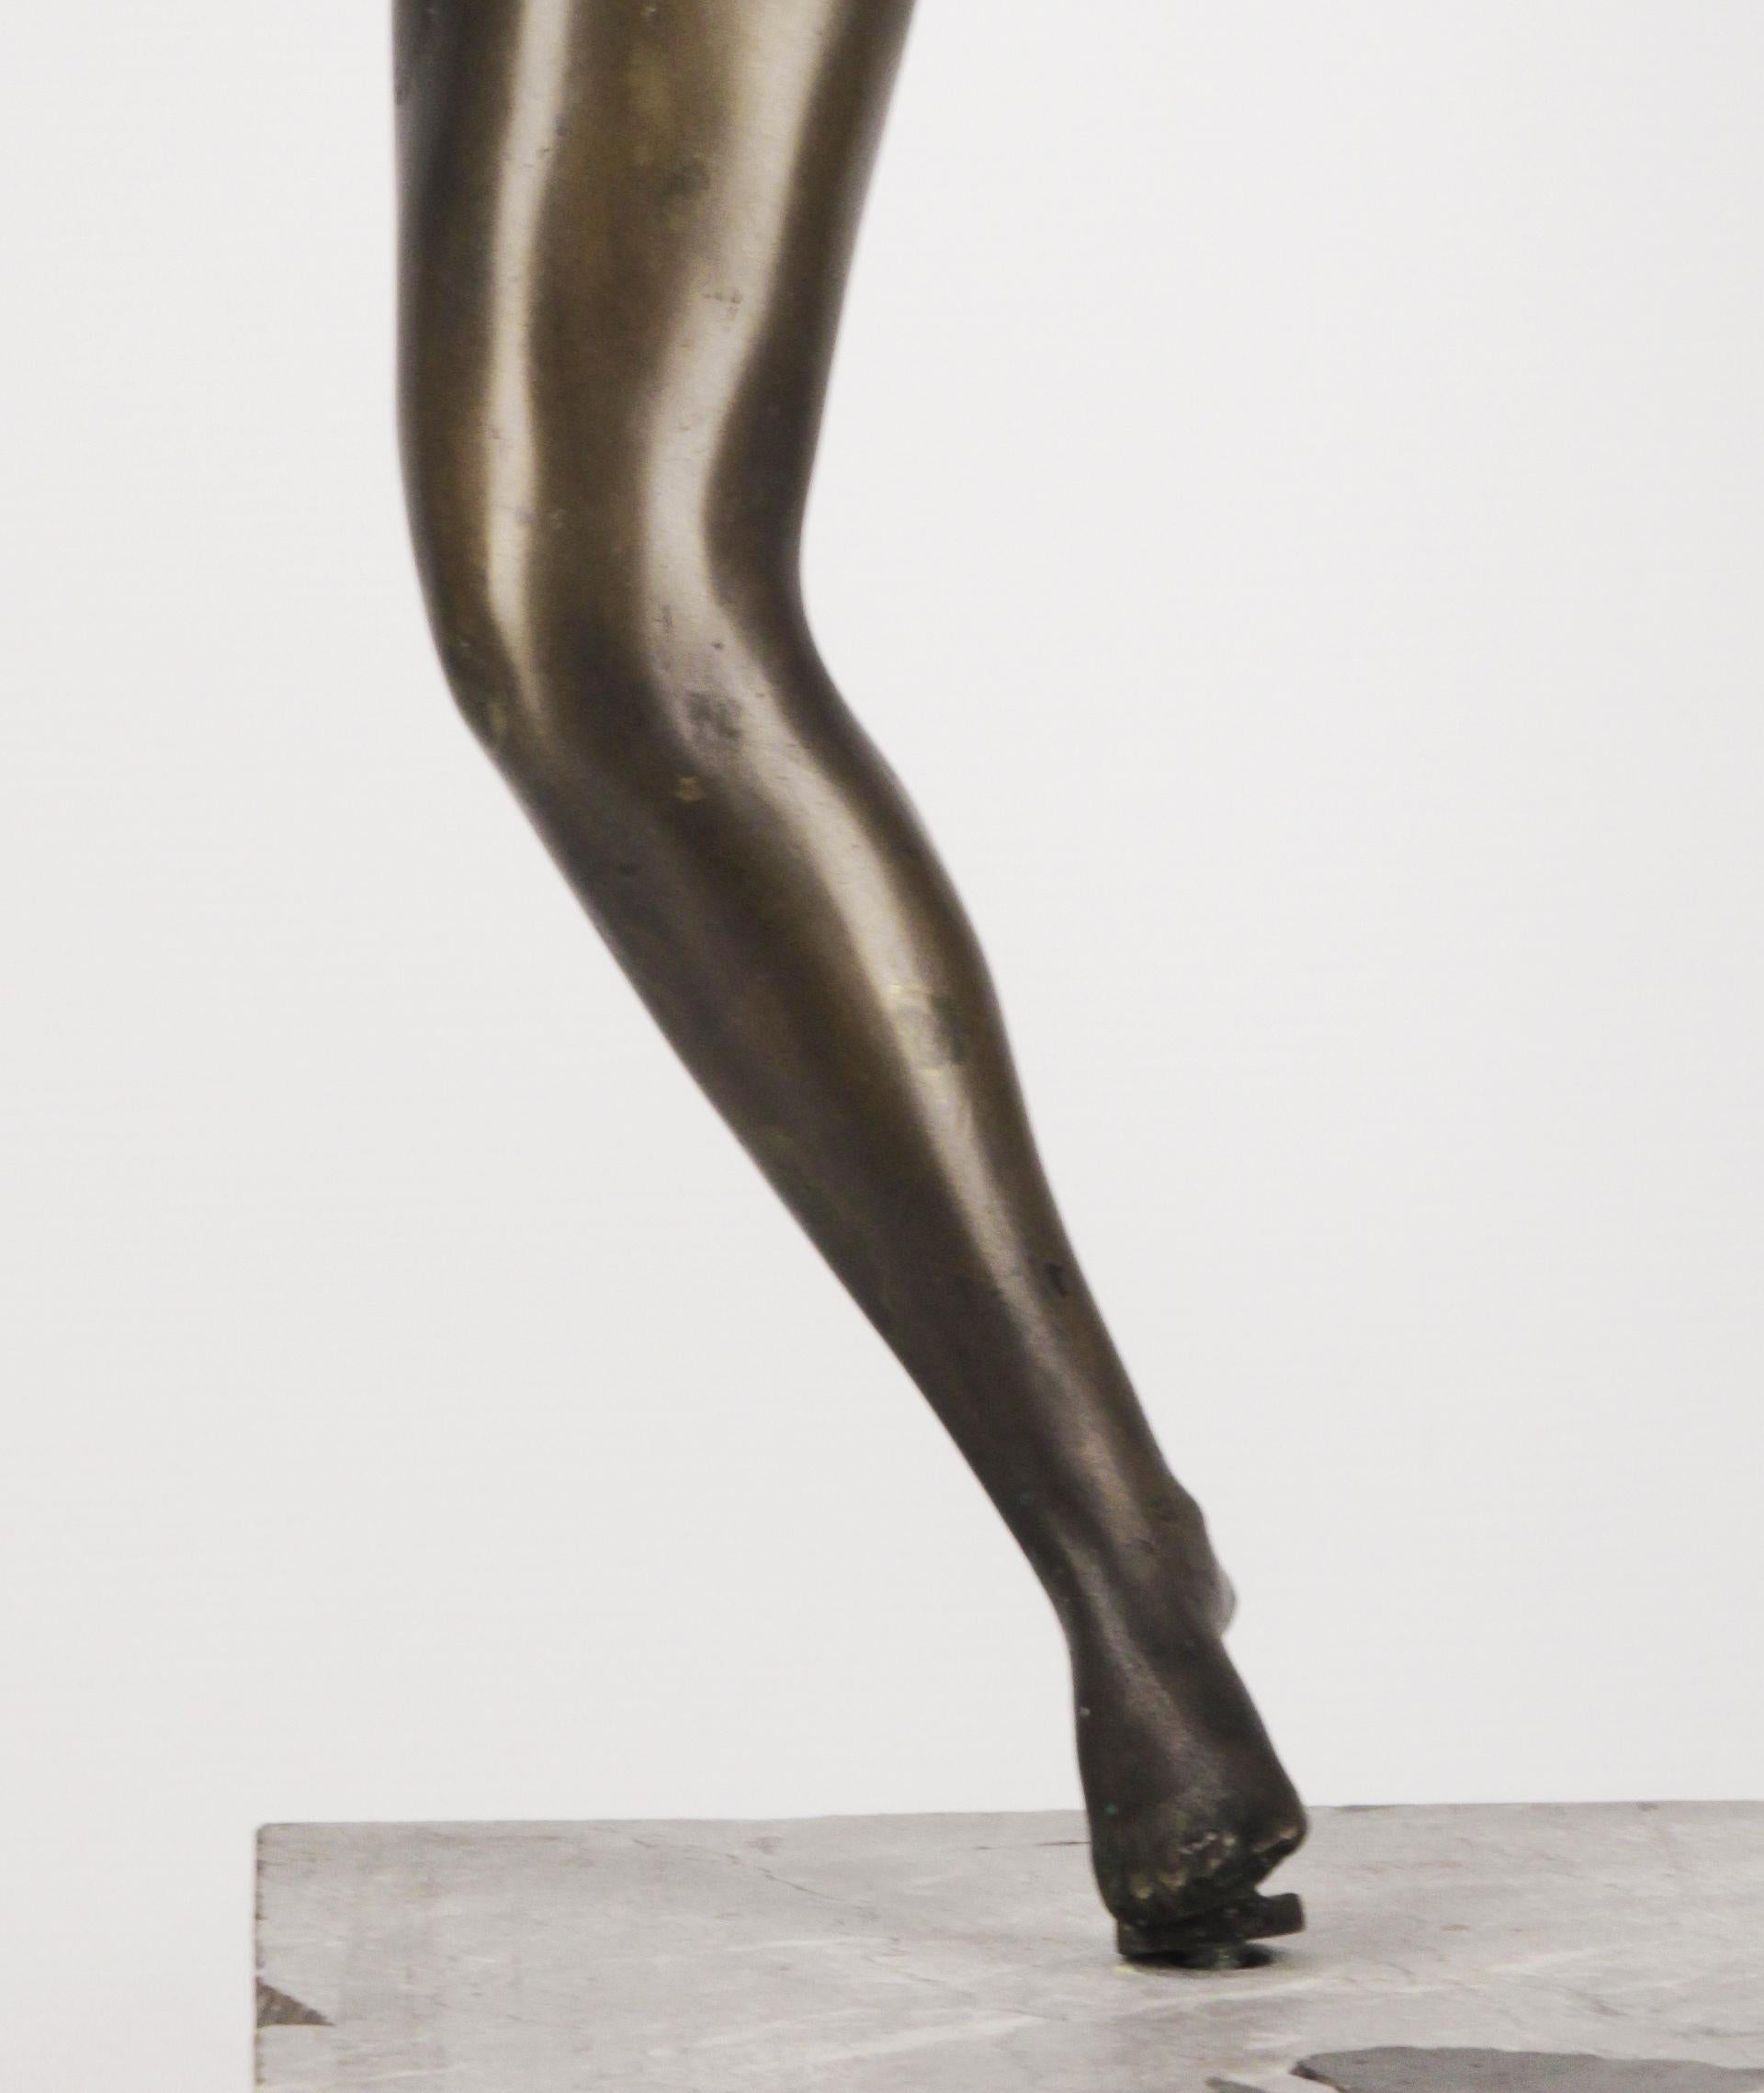 20th Century 20th C. Bronze Sculpture of a Nude Woman by Argentine Sculptor J. Mariano Pagés For Sale